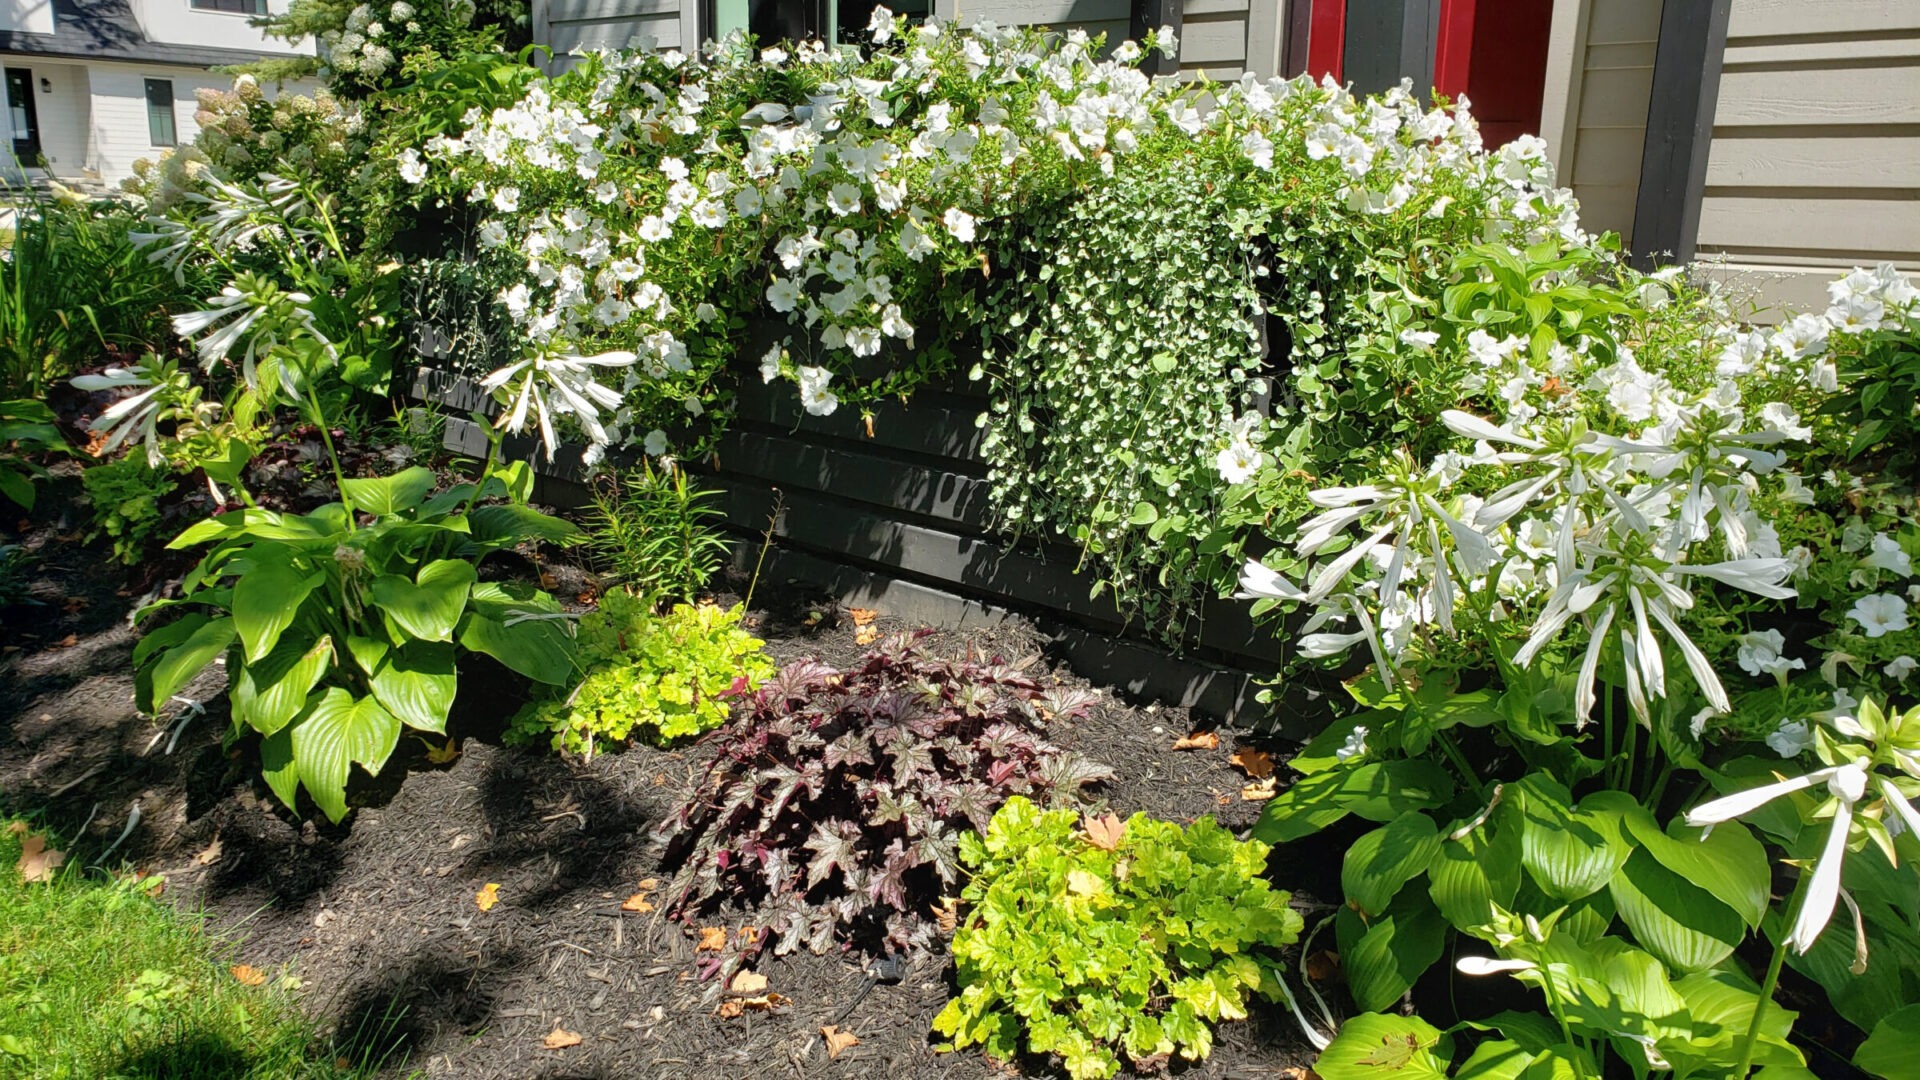 Lush garden with white flowering plants in a raised black bed, against a house with grey siding, under bright sunlight with green foliage.